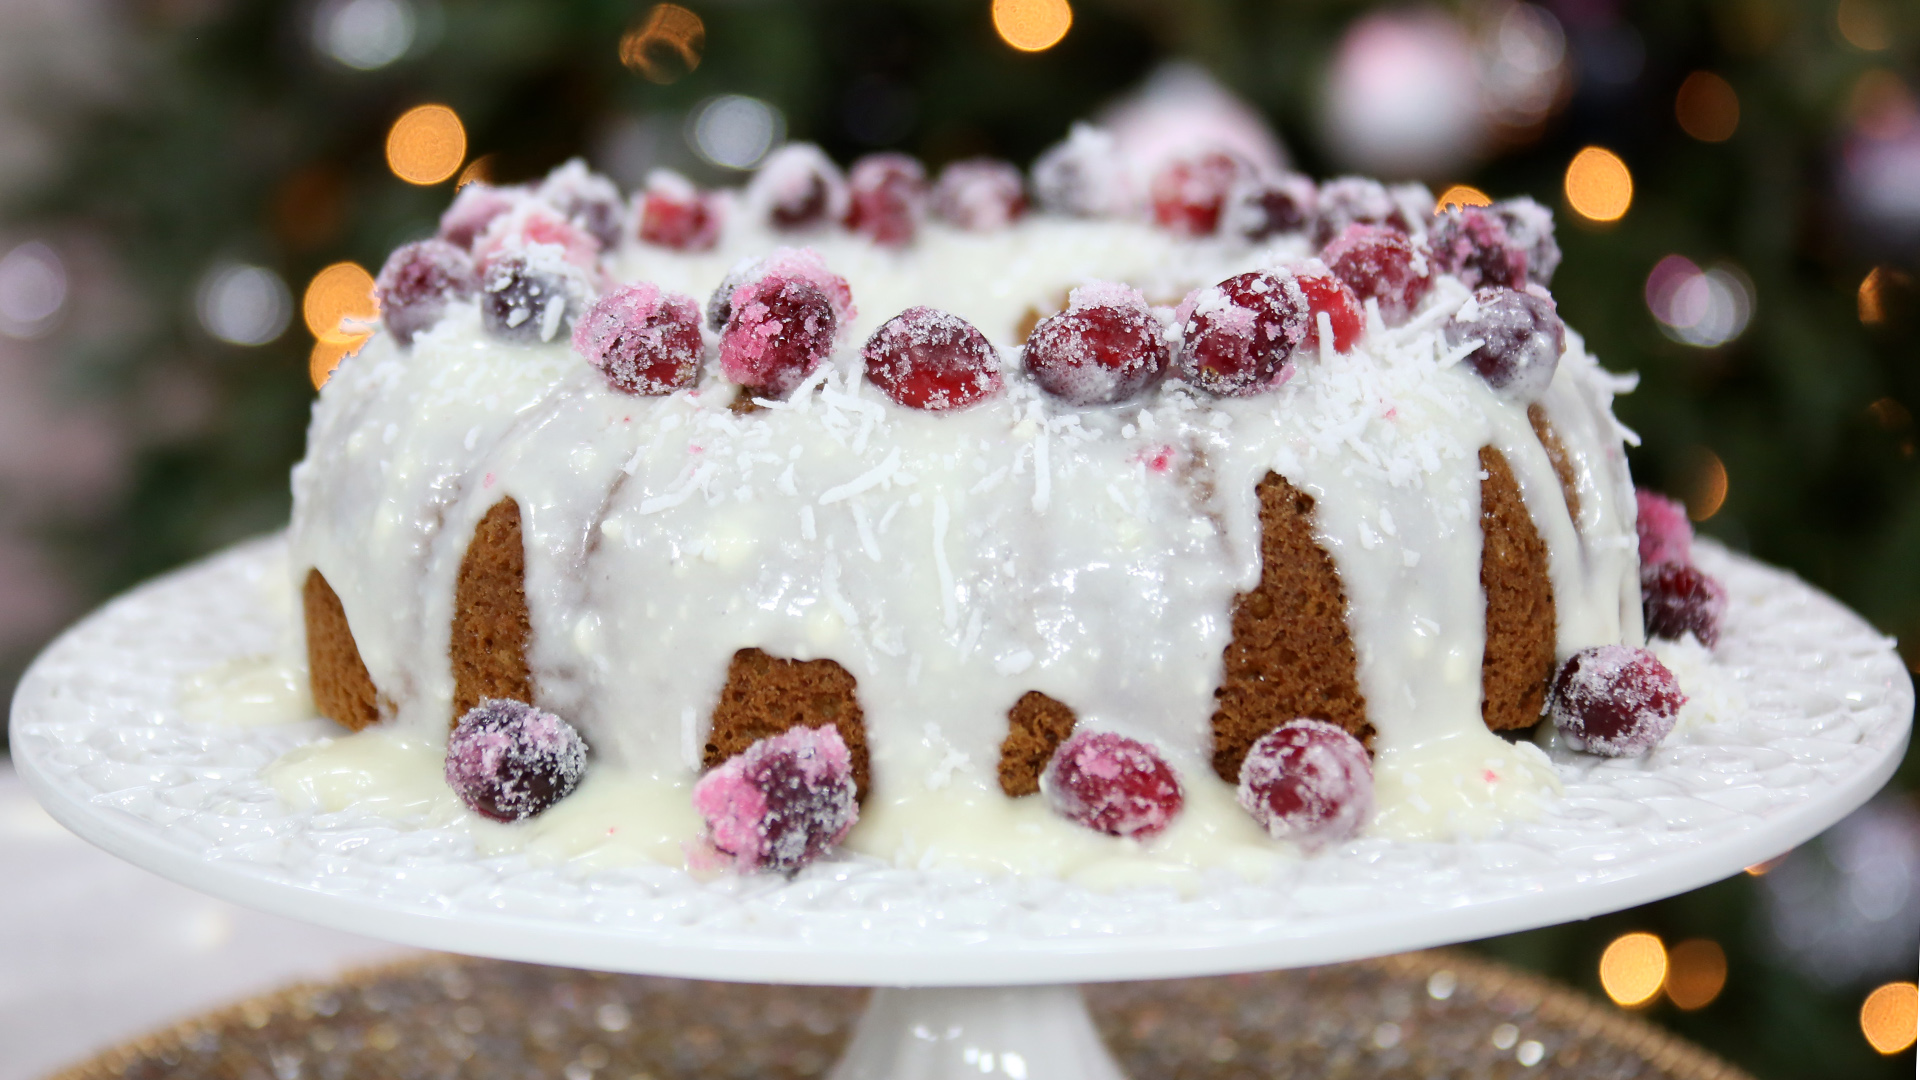 Coconut Bundt cake with sugared cranberries